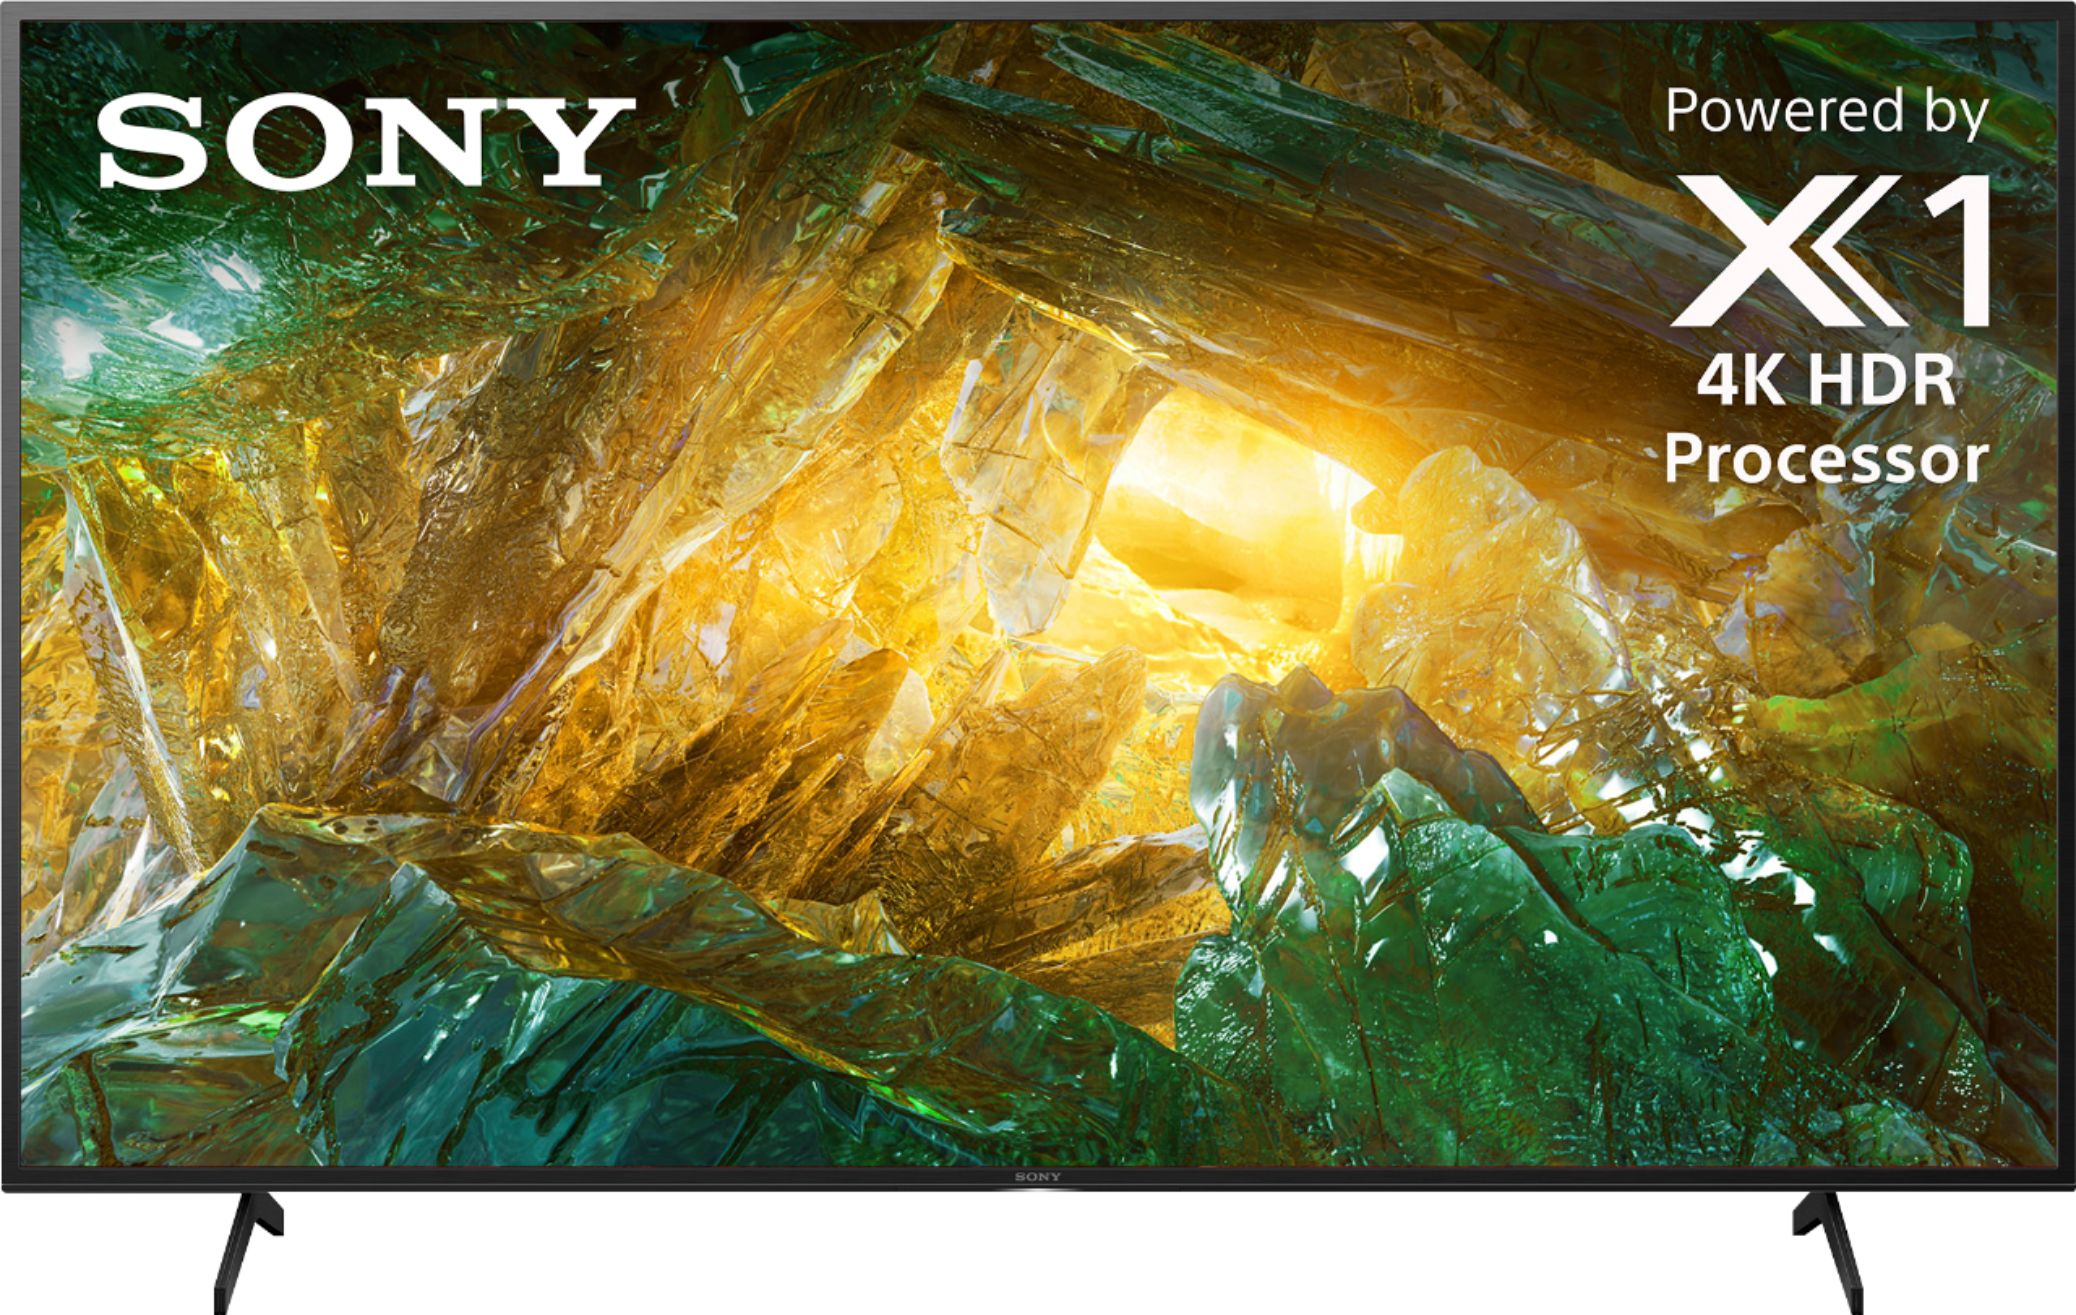 Sony – 65″ Class X800G Series LED 4K UHD TV Smart Android TV